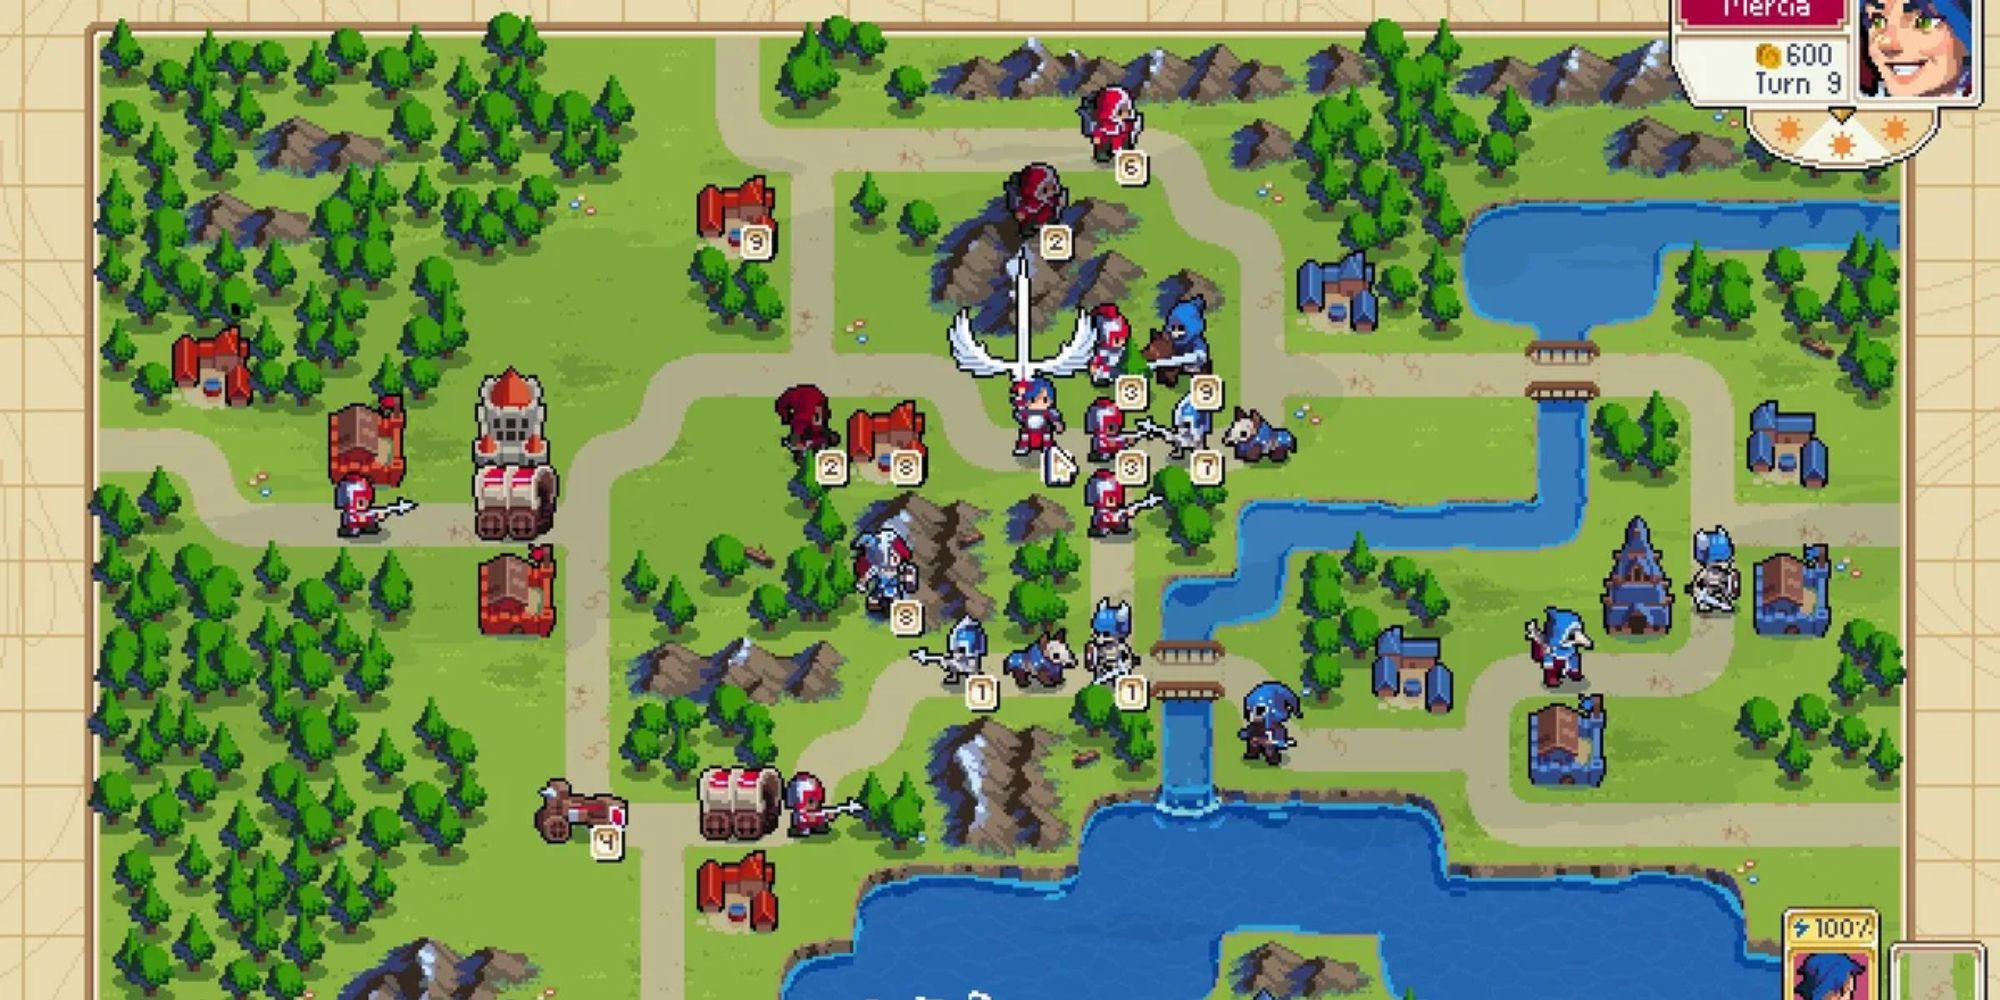 Players battling in a town in Wargroove